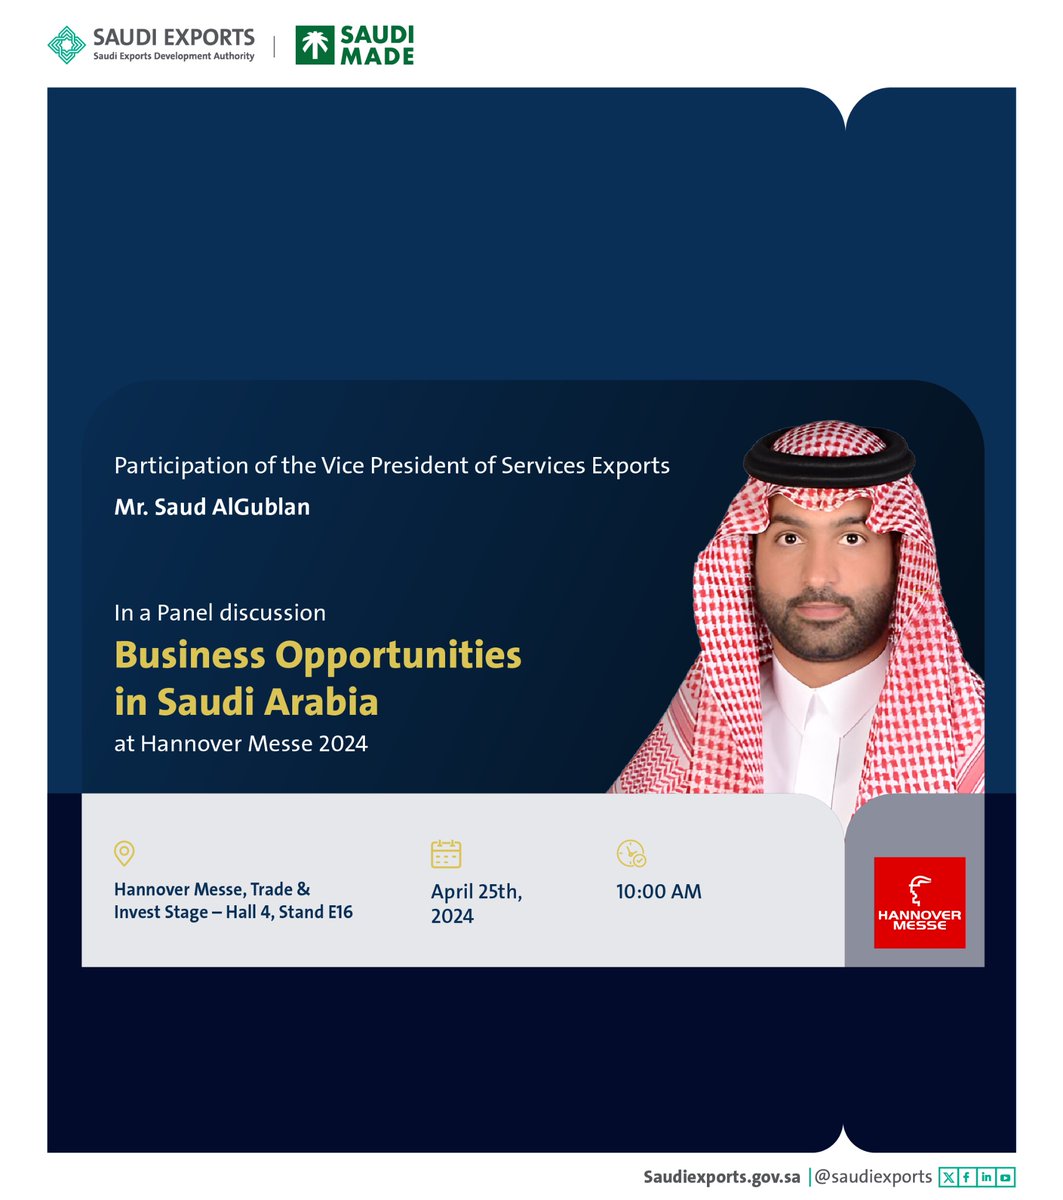 We invite you to attend the panel discussion held at Hannover Messe Fair #HM24 “Business Opportunities  in Saudi Arabia”, where the Vice President of Services Exports at Saudi Exports Development Authority Mr. Saud AlGublan will be part of.

#SaudiExports